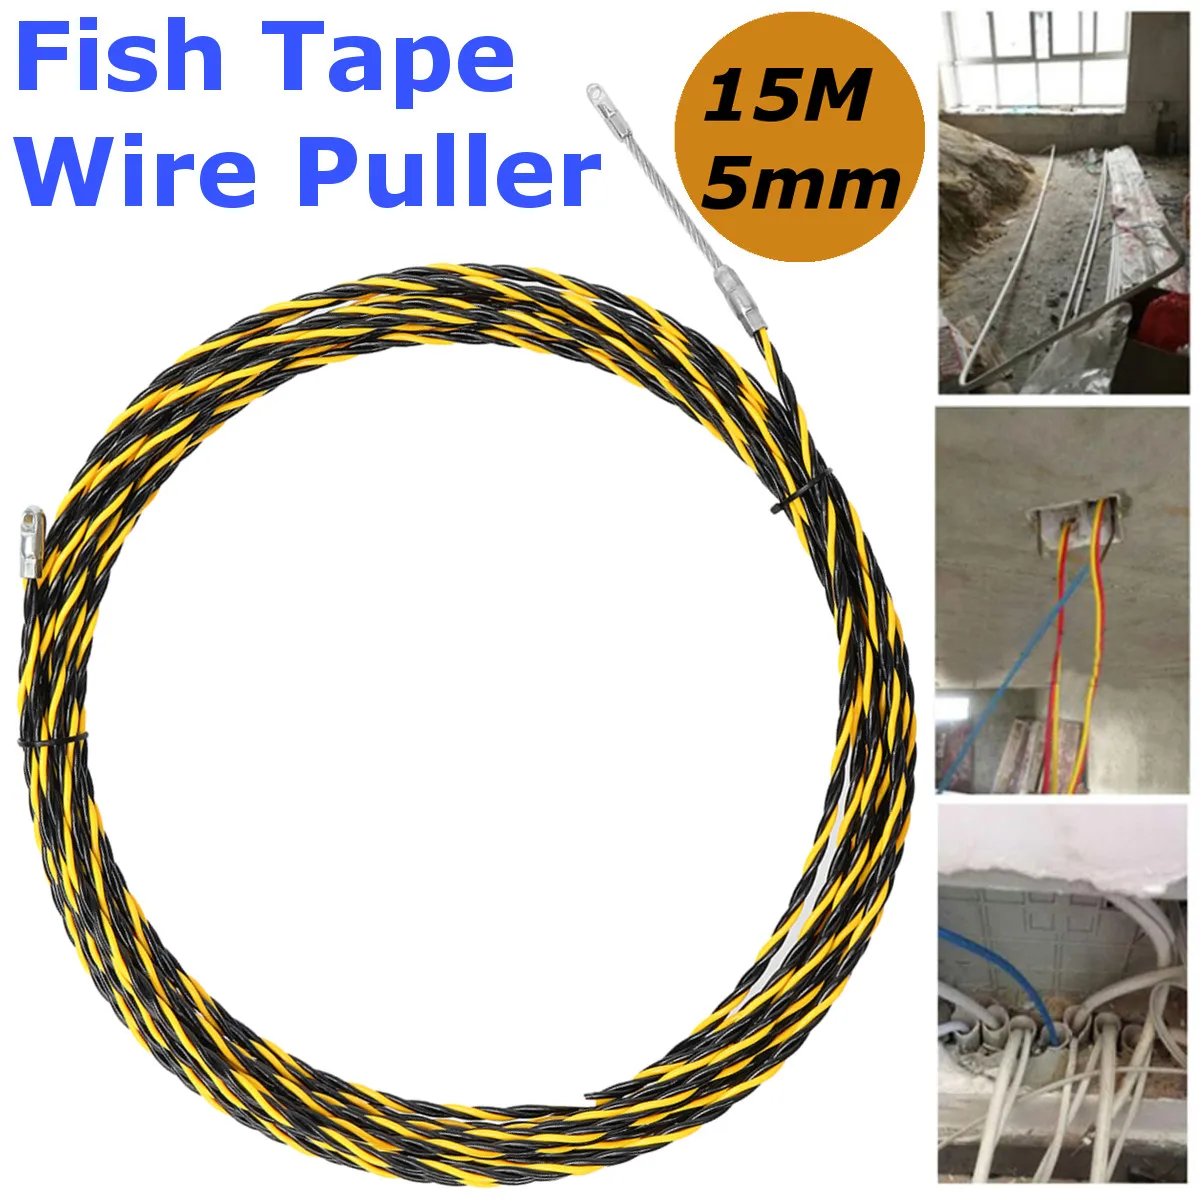 Cable Puller Electrical Wire Fish Tape Cable Wire Puller Hand Tool Lead Device 